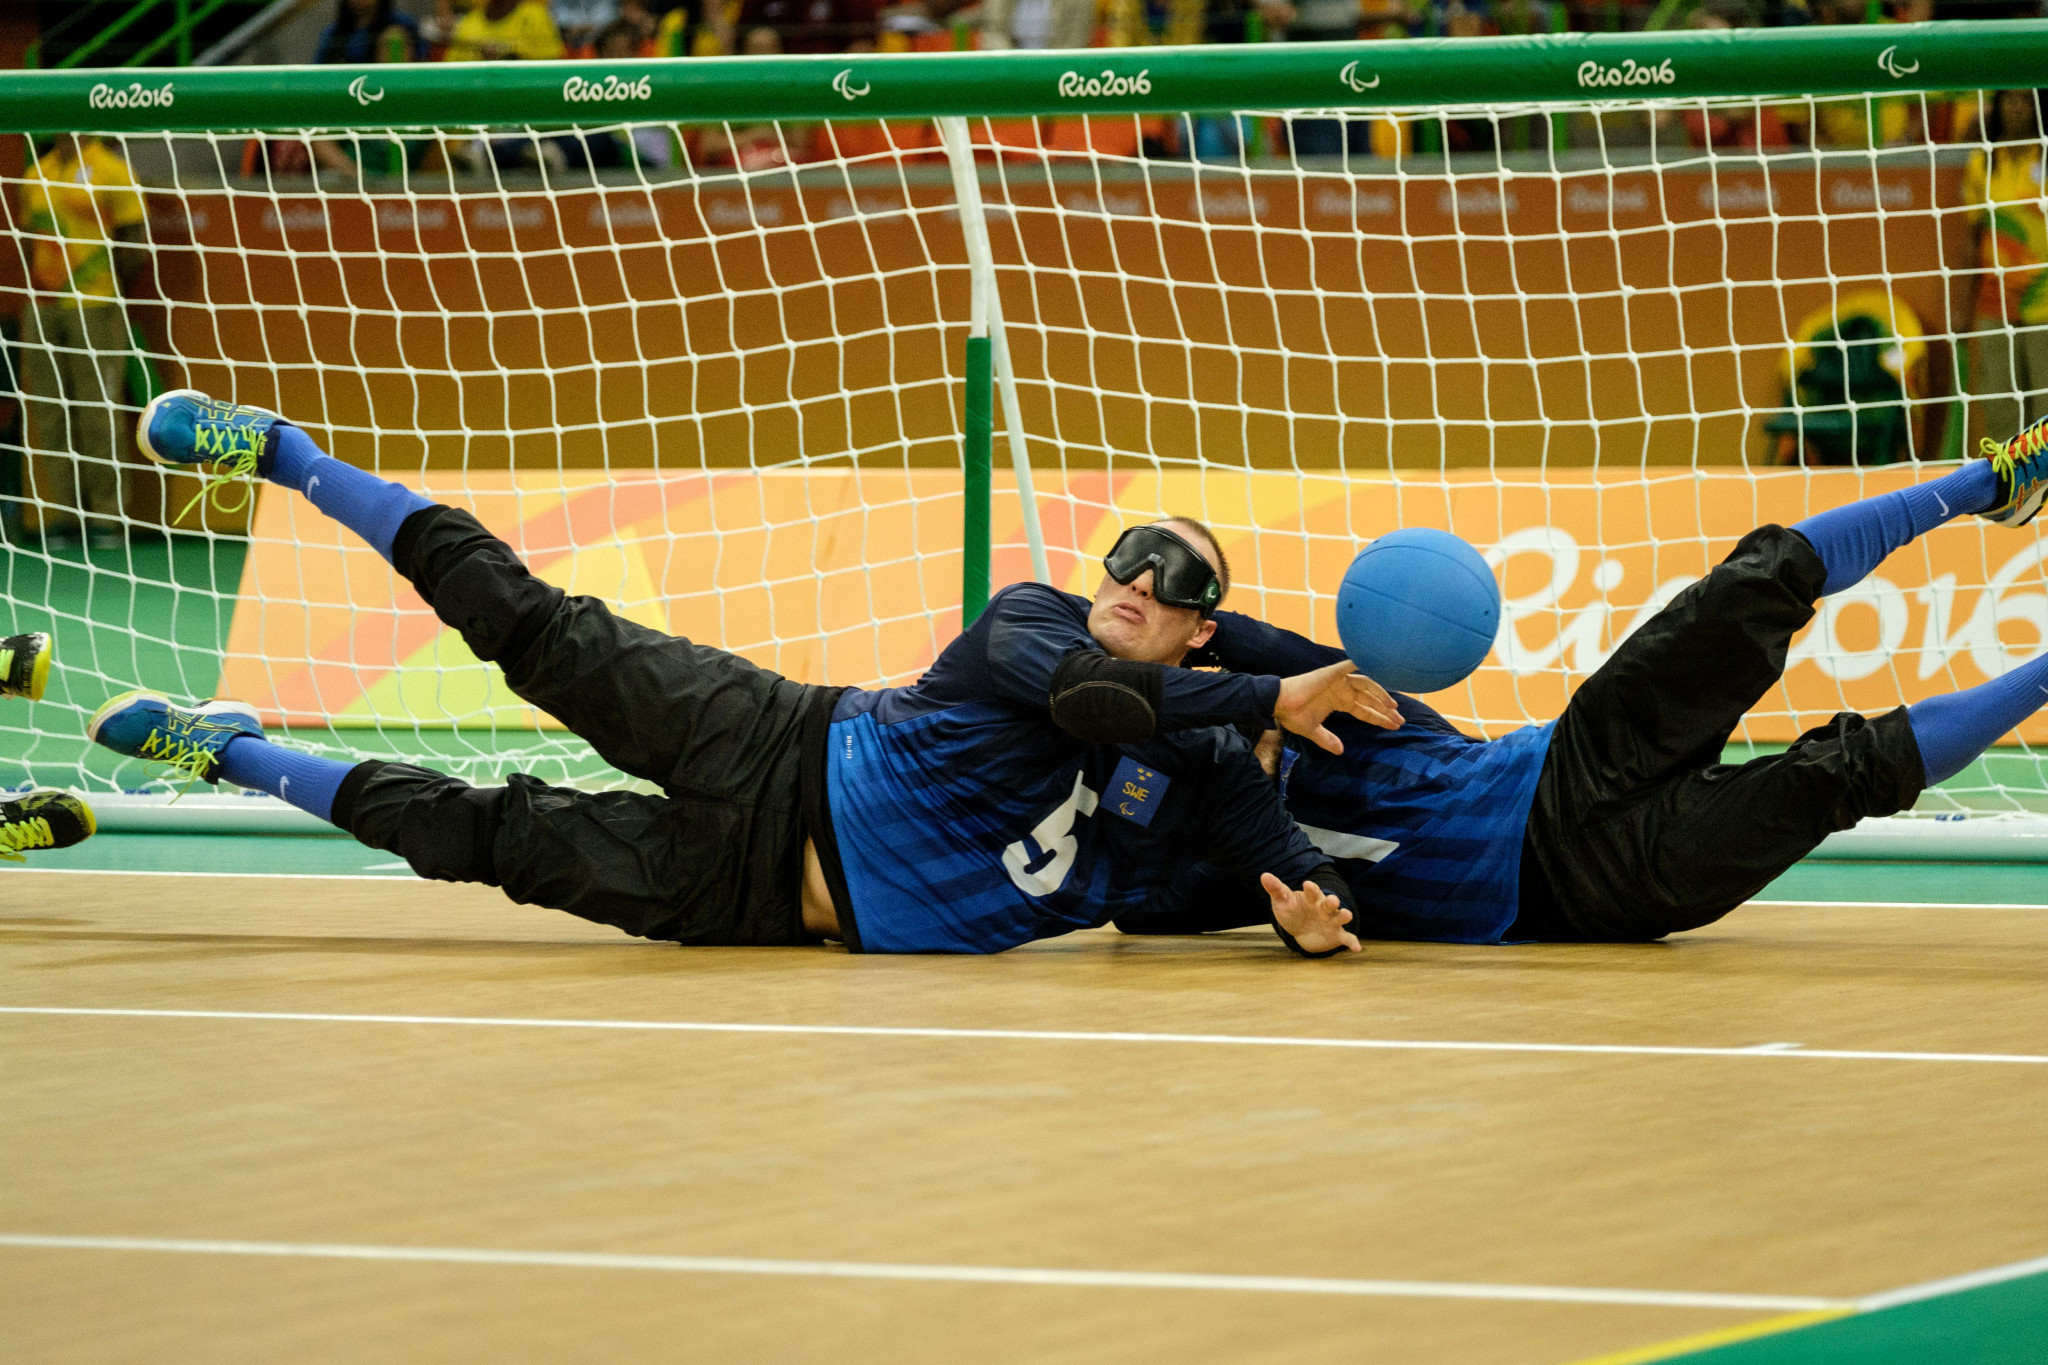 Ibsa President Claims Blind Football Judo And Goalball Fully Deserving Of Place On Paris 24 Programme